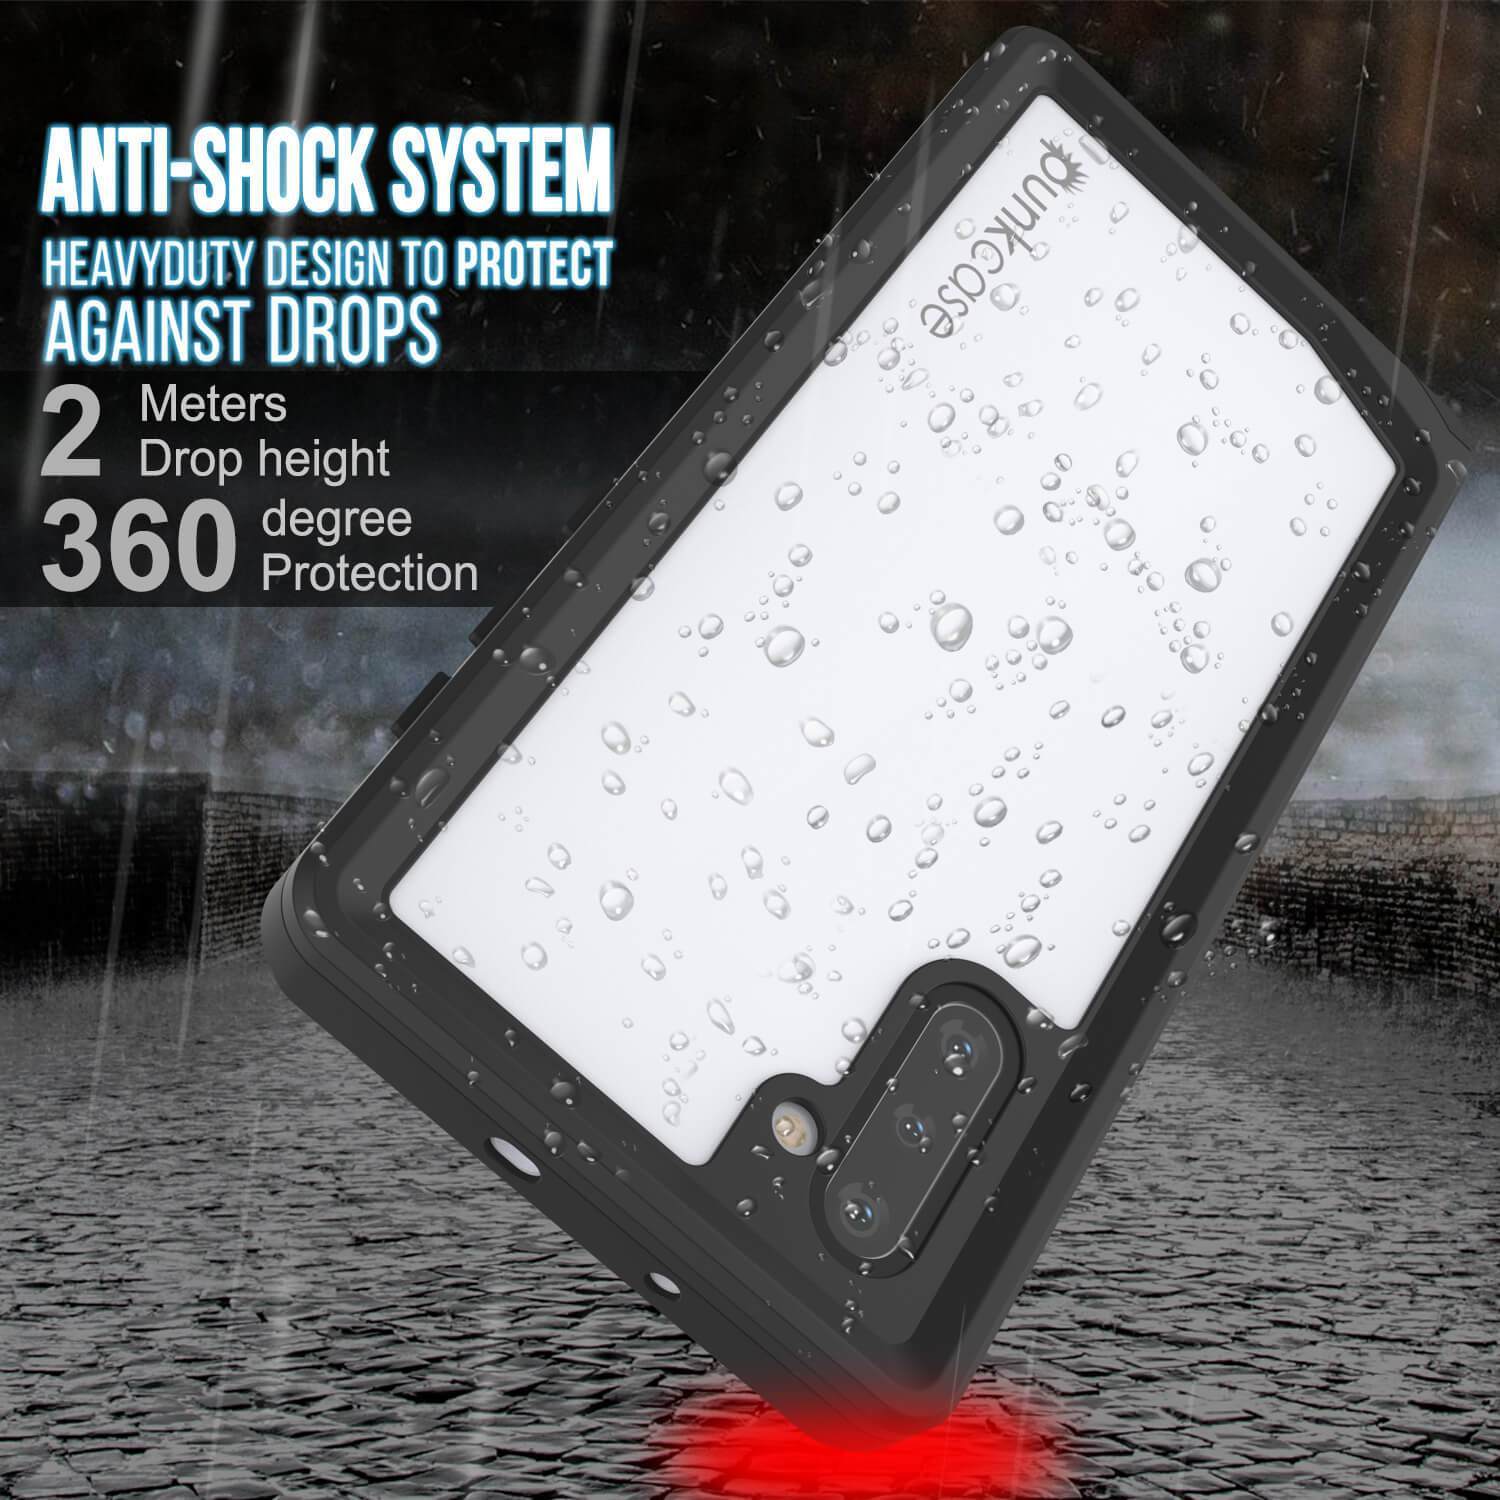 Galaxy Note 10 Waterproof Case, Punkcase Studstar White Thin Armor Cover